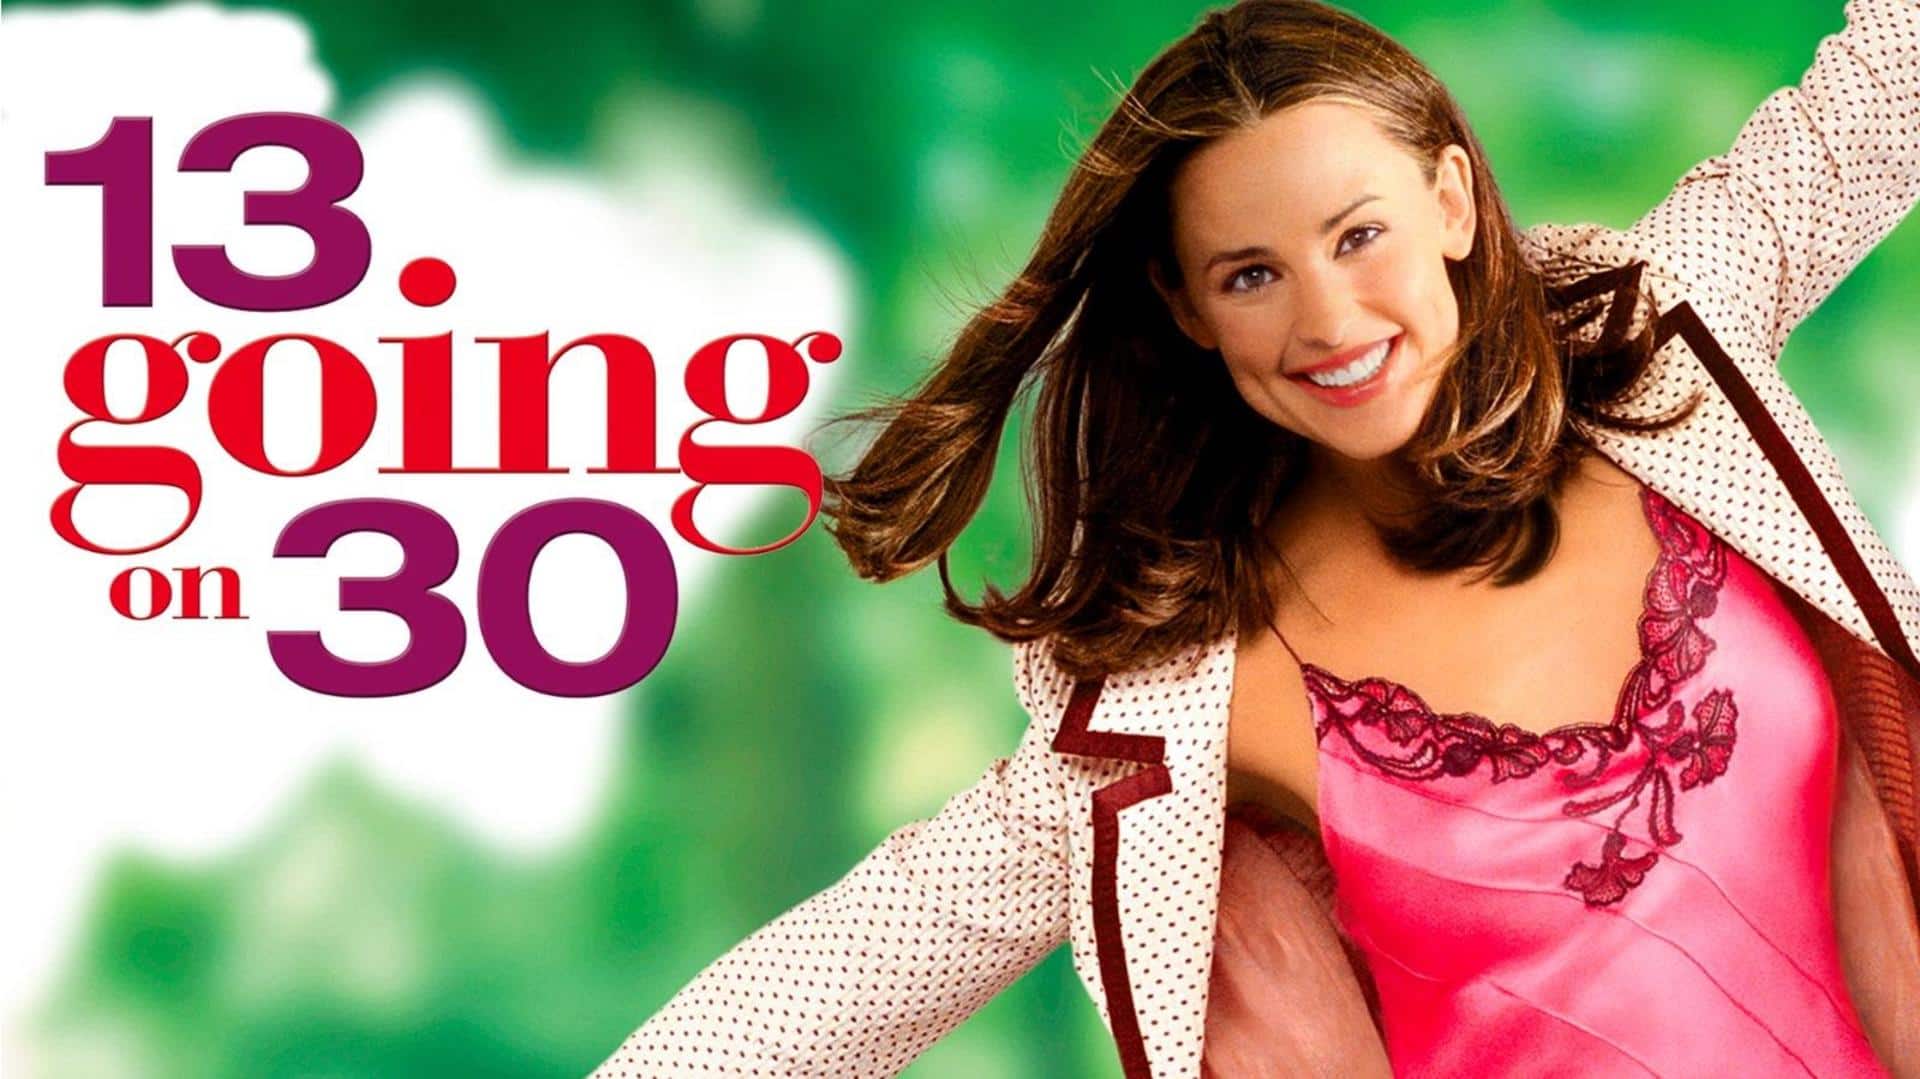 13 Going On 30: Class of 2004 (HD CLIP) - YouTube